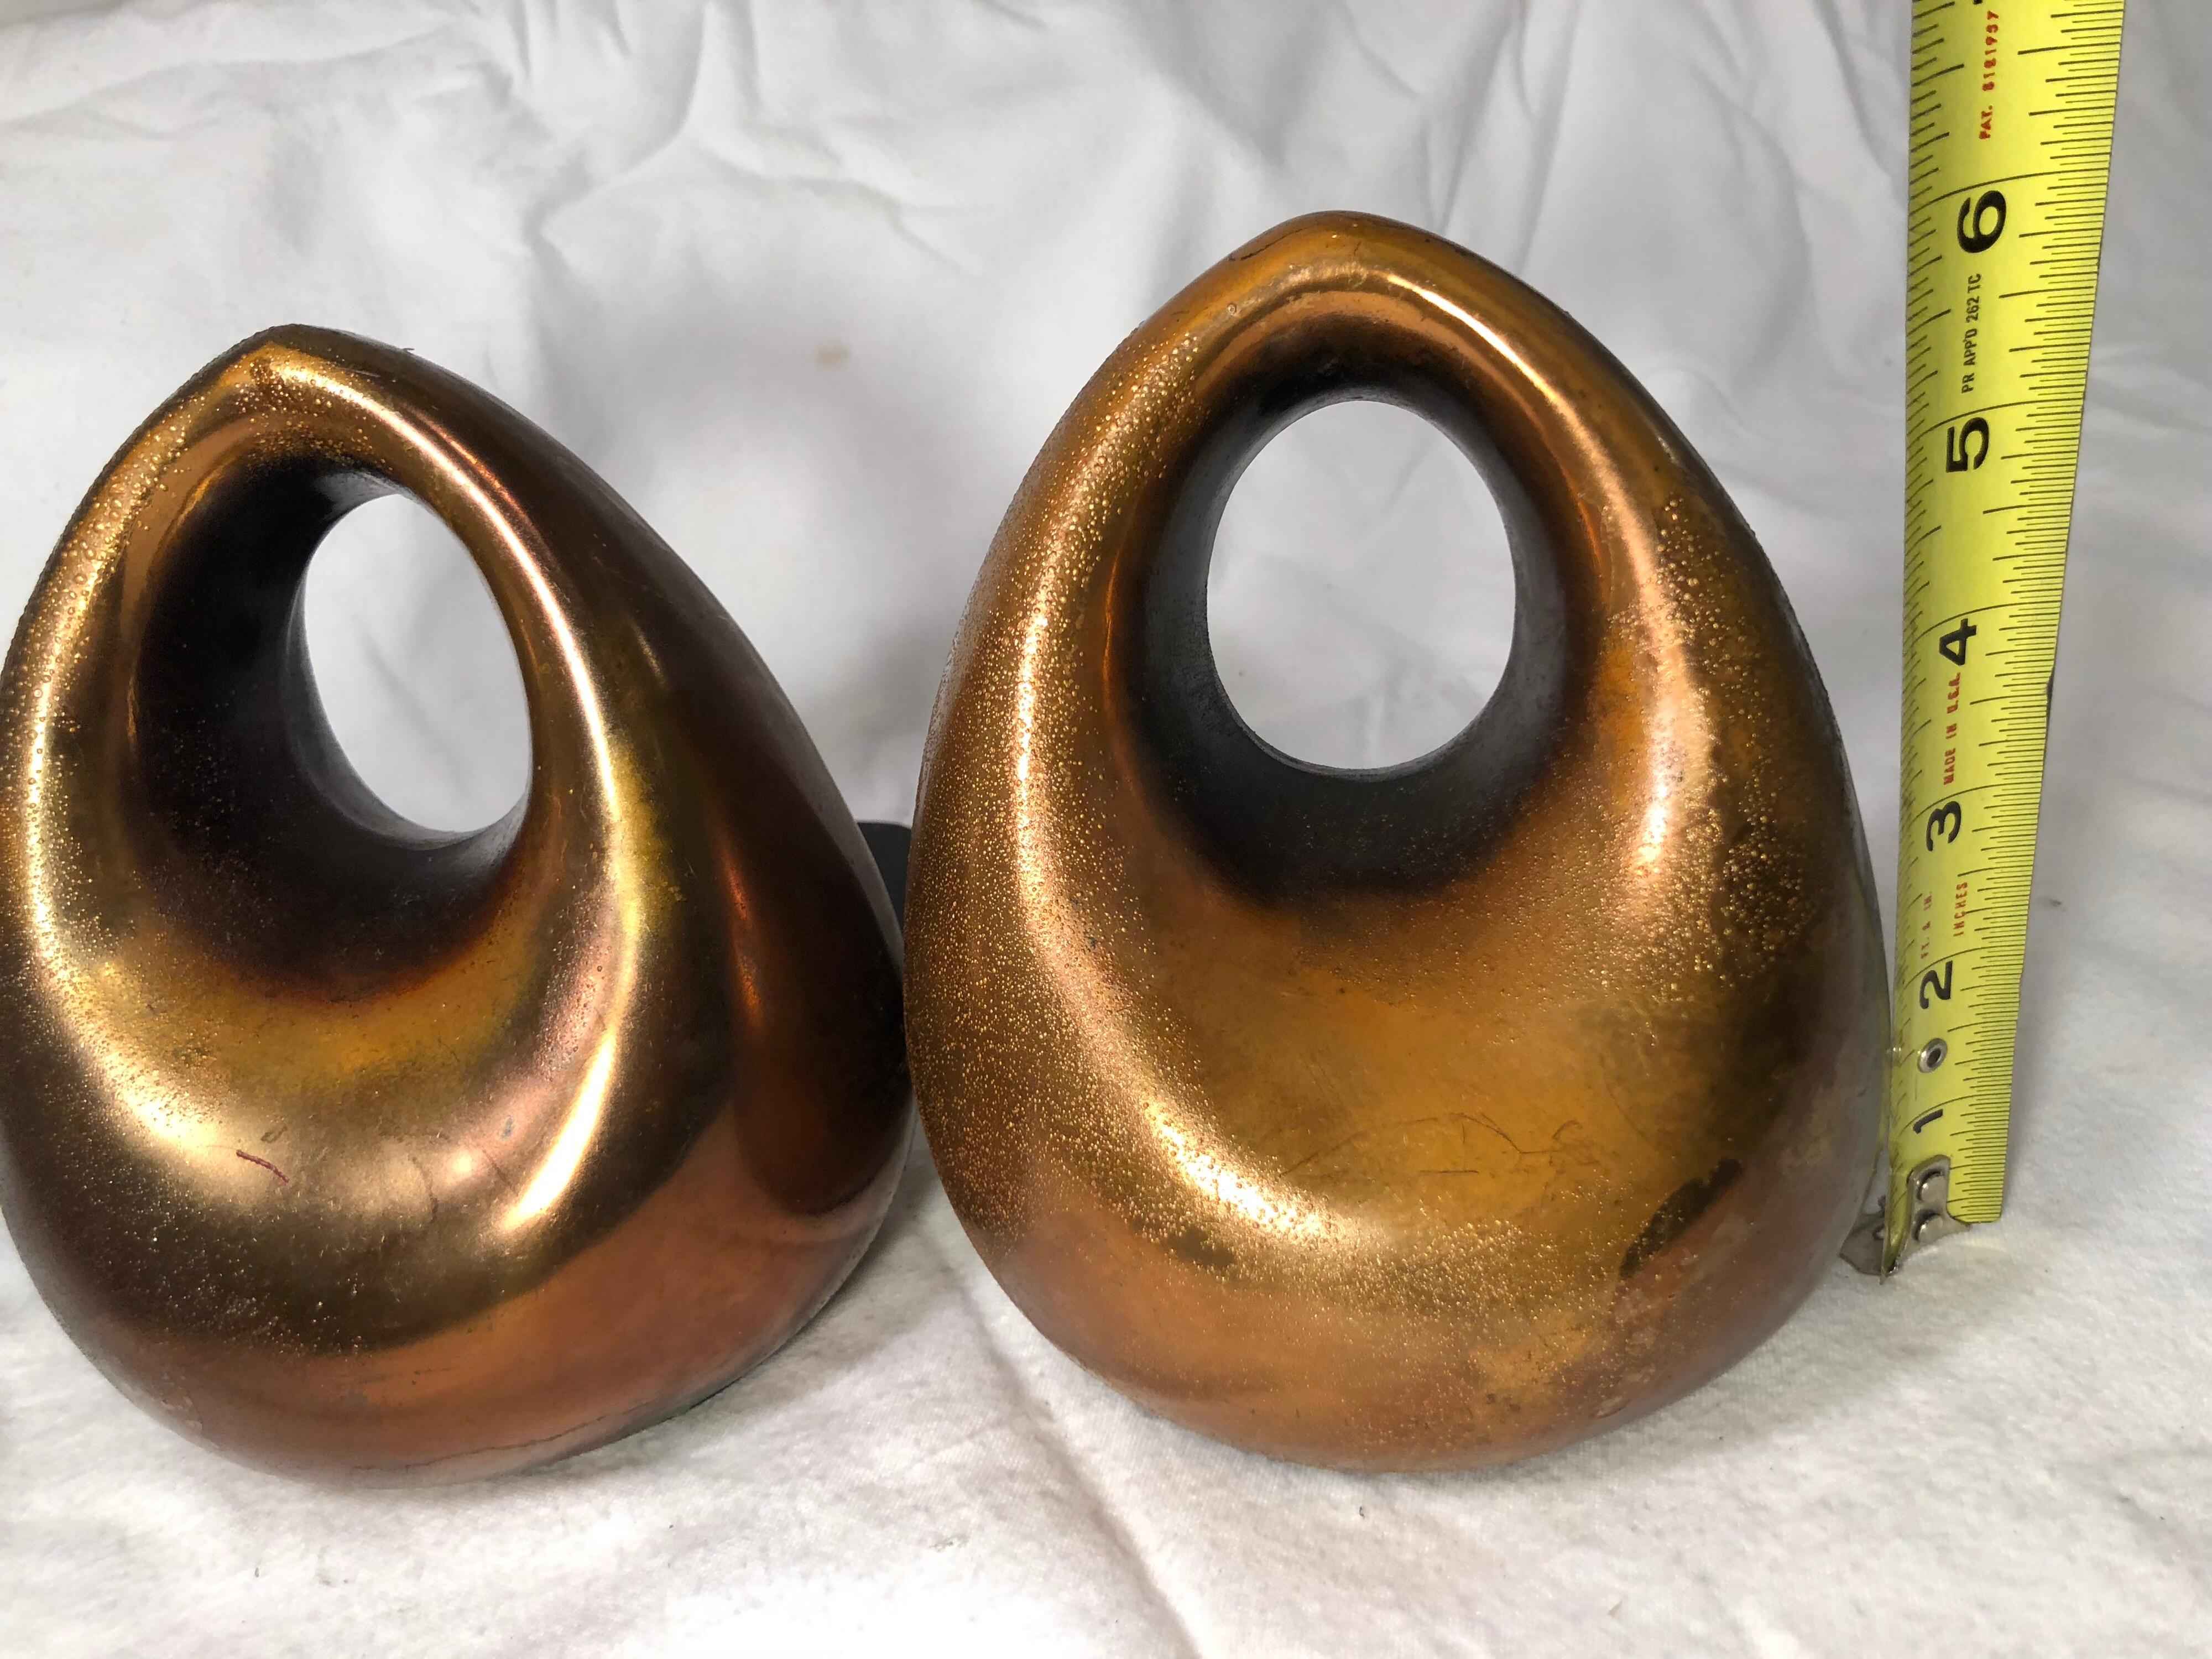 Ben Seibel copper finish orb bookends by JenFred. Retro mod style. Great for any midcentury Office or home.